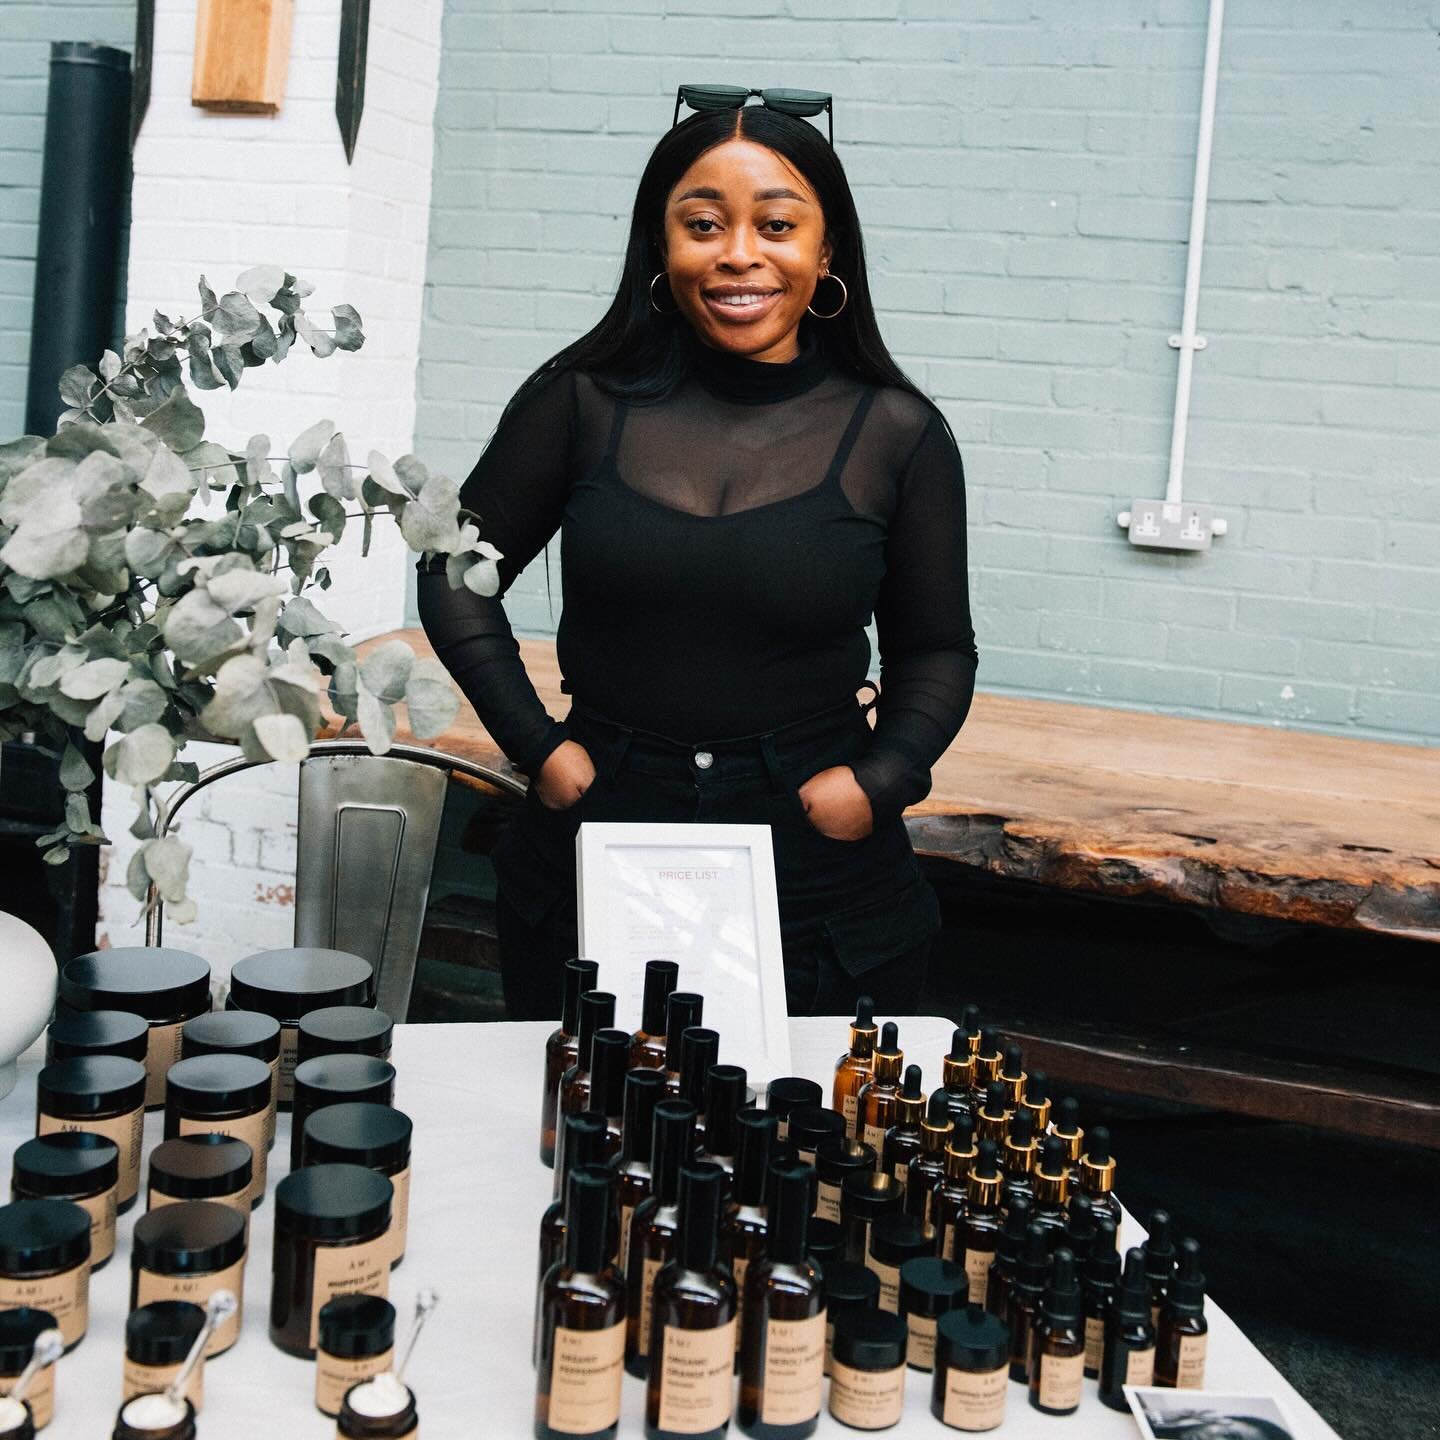 So very chuffed with the lineup at our next makers market on Saturday 1st June inside @batterseapwrstn ✨ Here are two more wonderful small businesses taking part with us! 

🖤 @amilondon 🖤 AMI London is a skincare and wellness brand formulated by a 